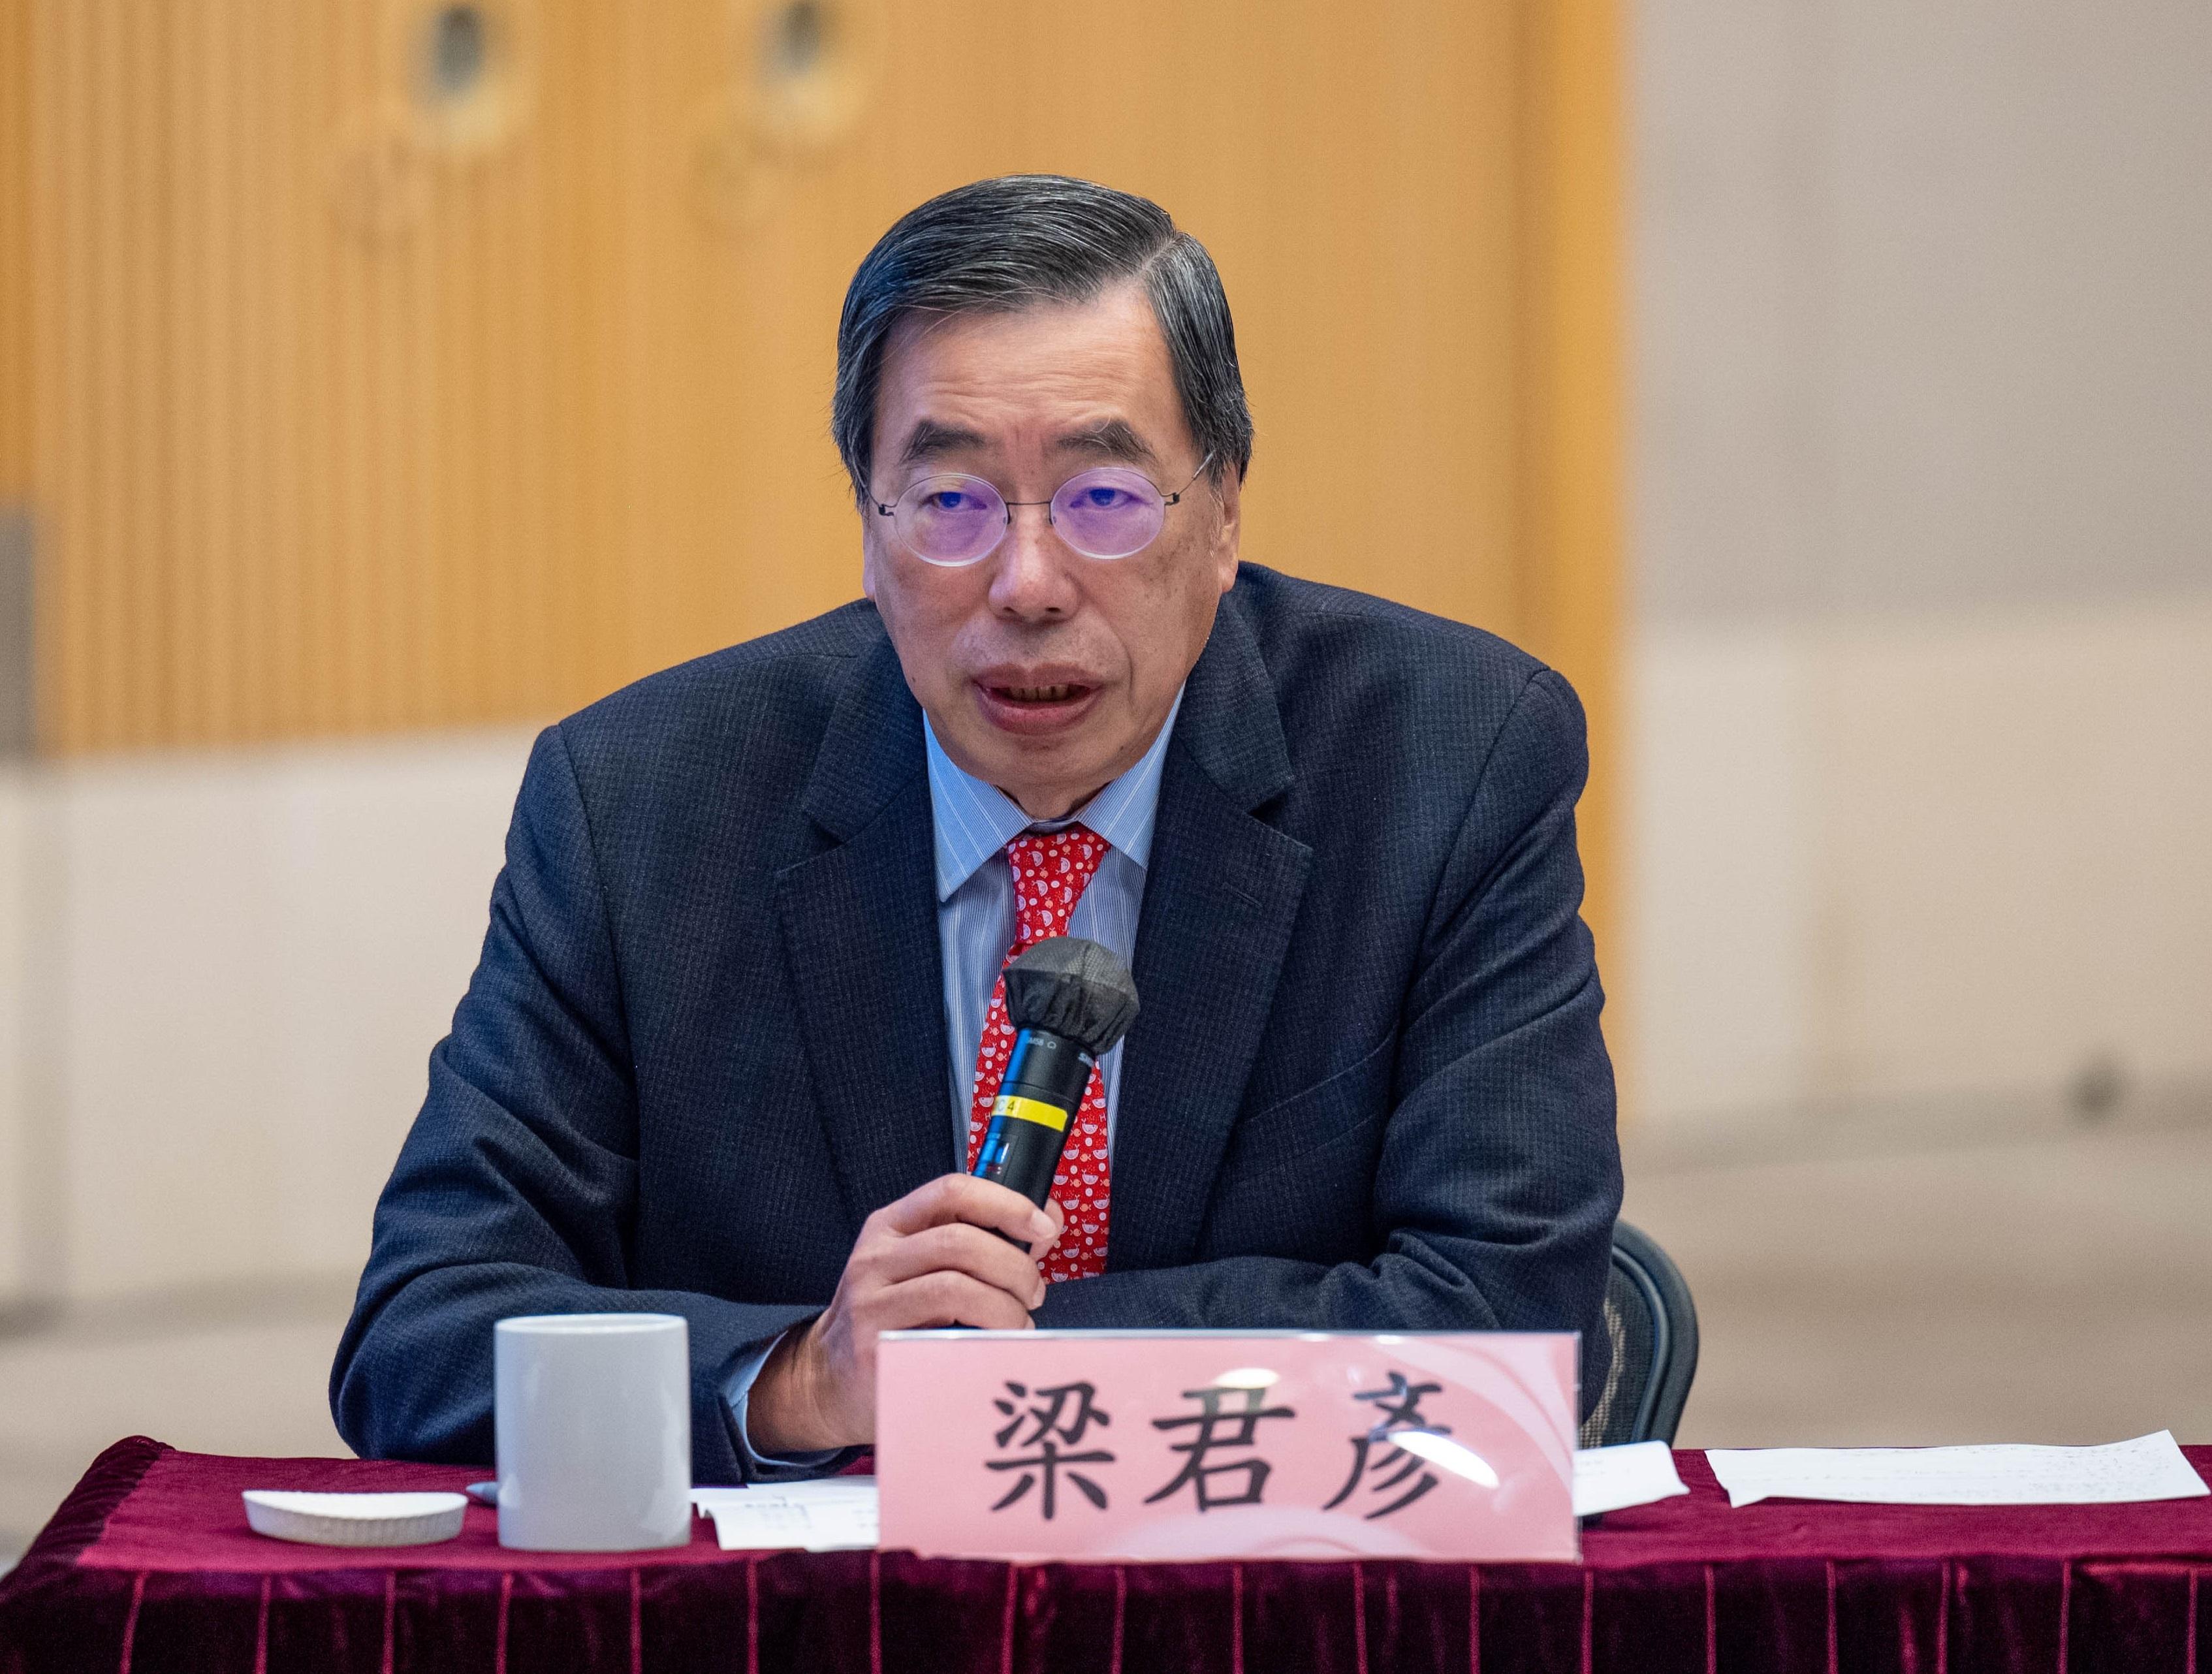 The Hong Kong Special Administrative Region Government today (March 28) held a seminar on learning and implementing the spirit of the “two sessions” at the Central Government Offices. Photo shows the President of Legislative Council, Mr Andrew Leung, sharing his views.